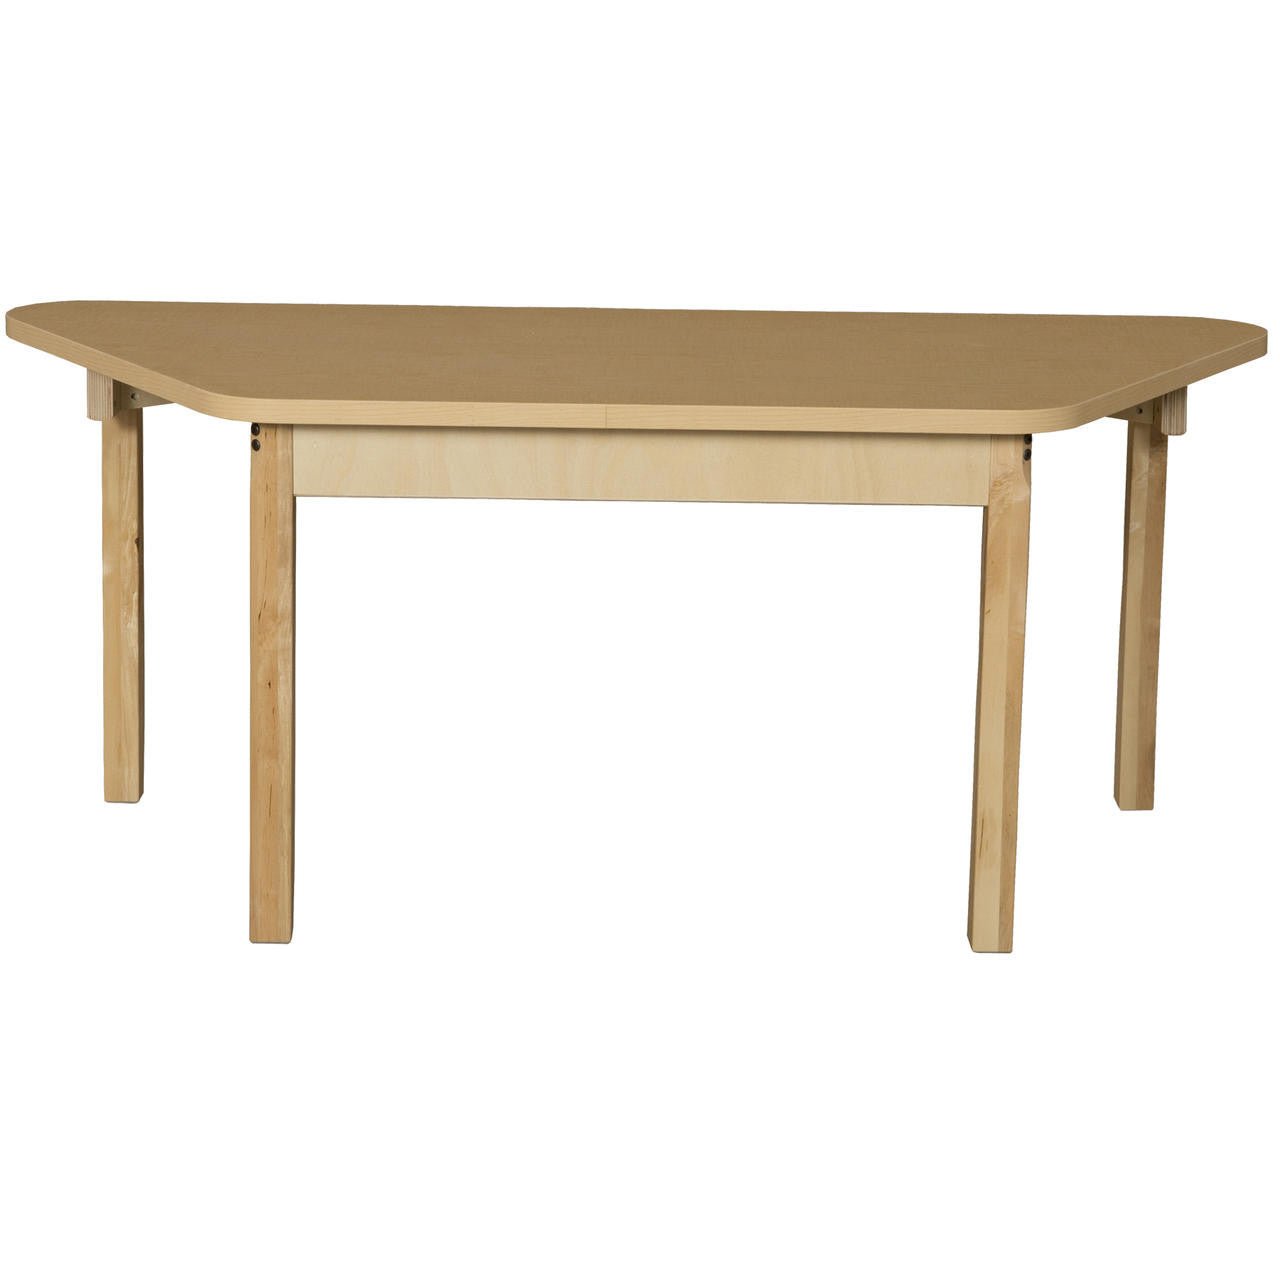 Trapezoidal High Pressure Laminate Table with Hardwood Legs- 26"